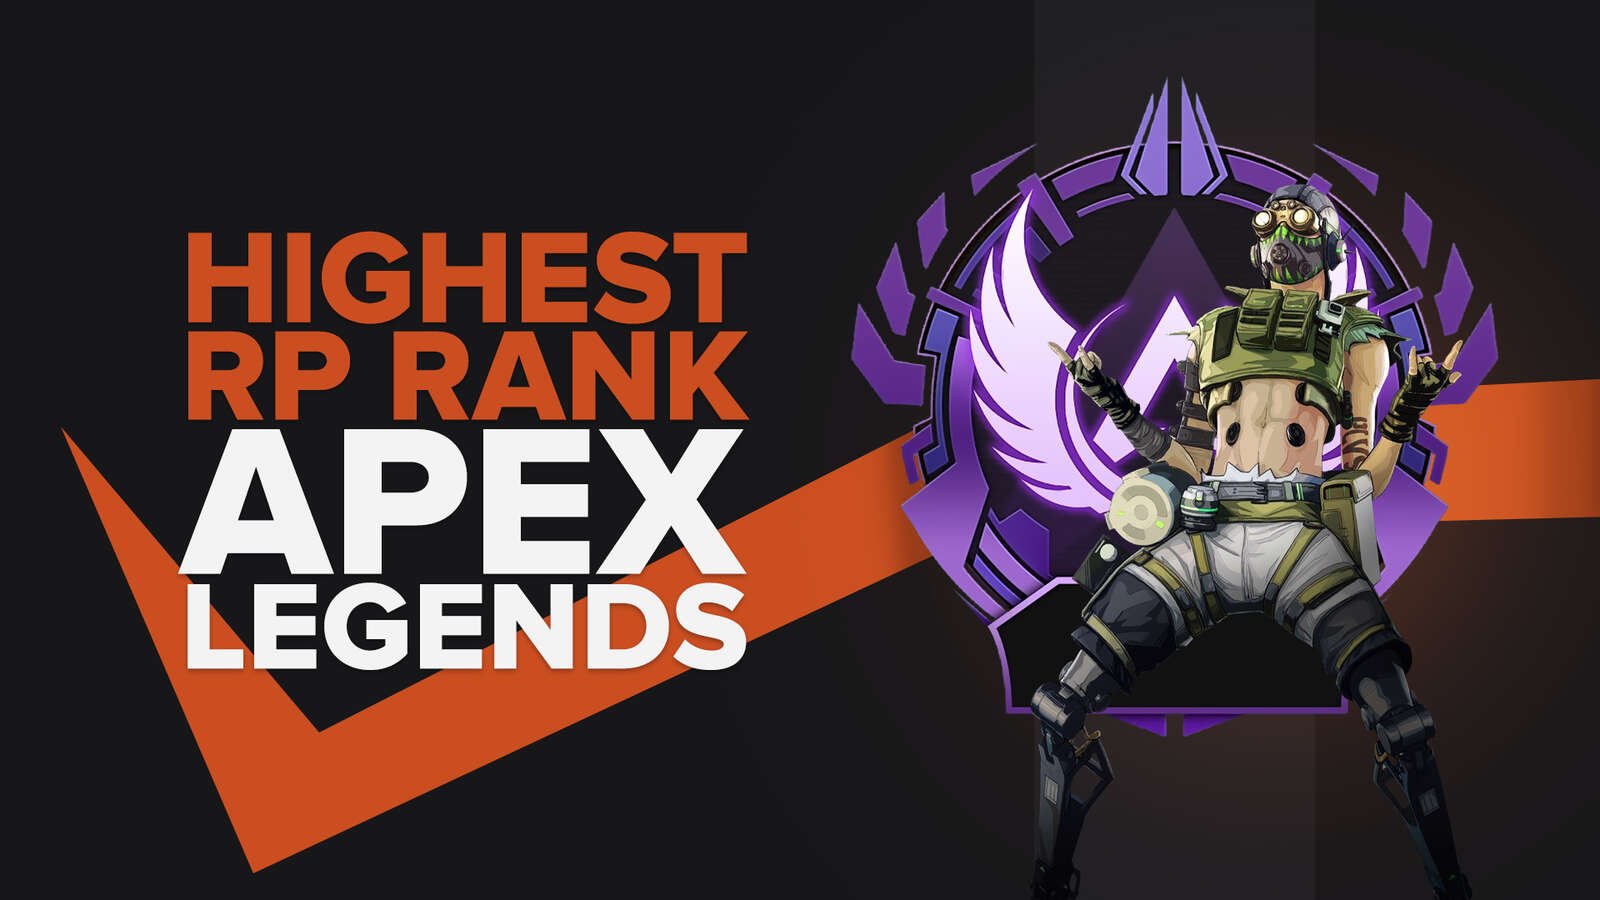 The highest rank RP in Apex Legends explained!